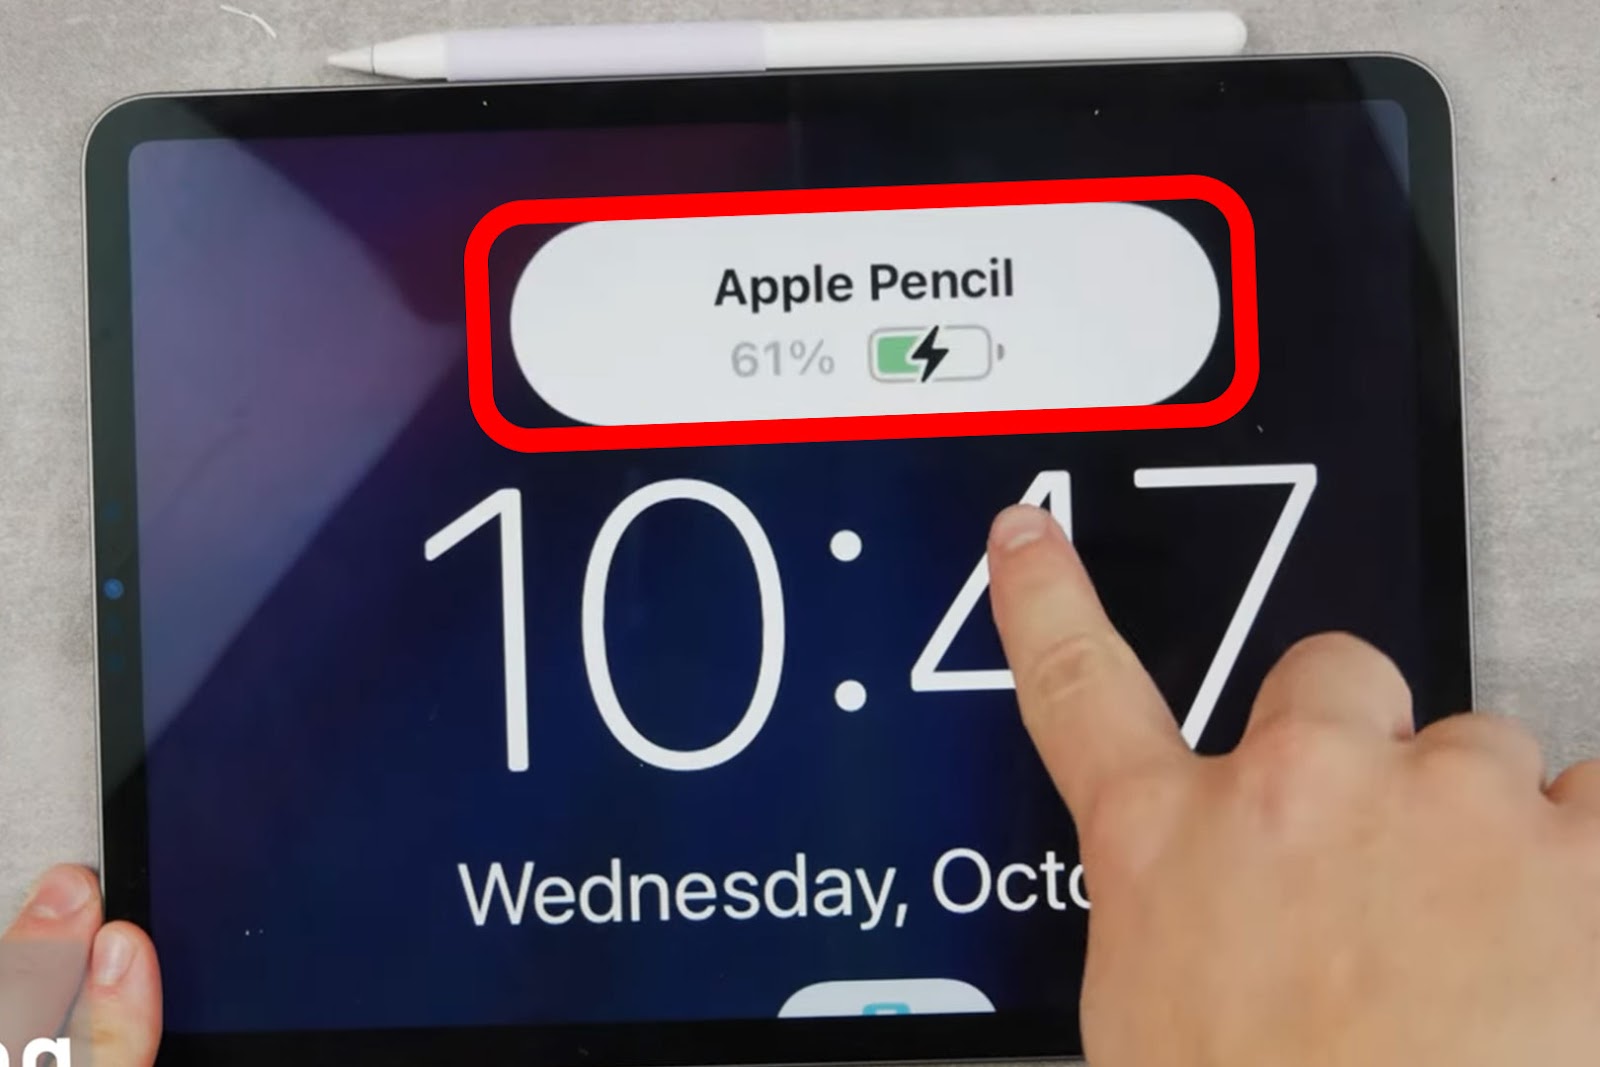 How to See Apple Pencil Battey Life - Connect to iPad